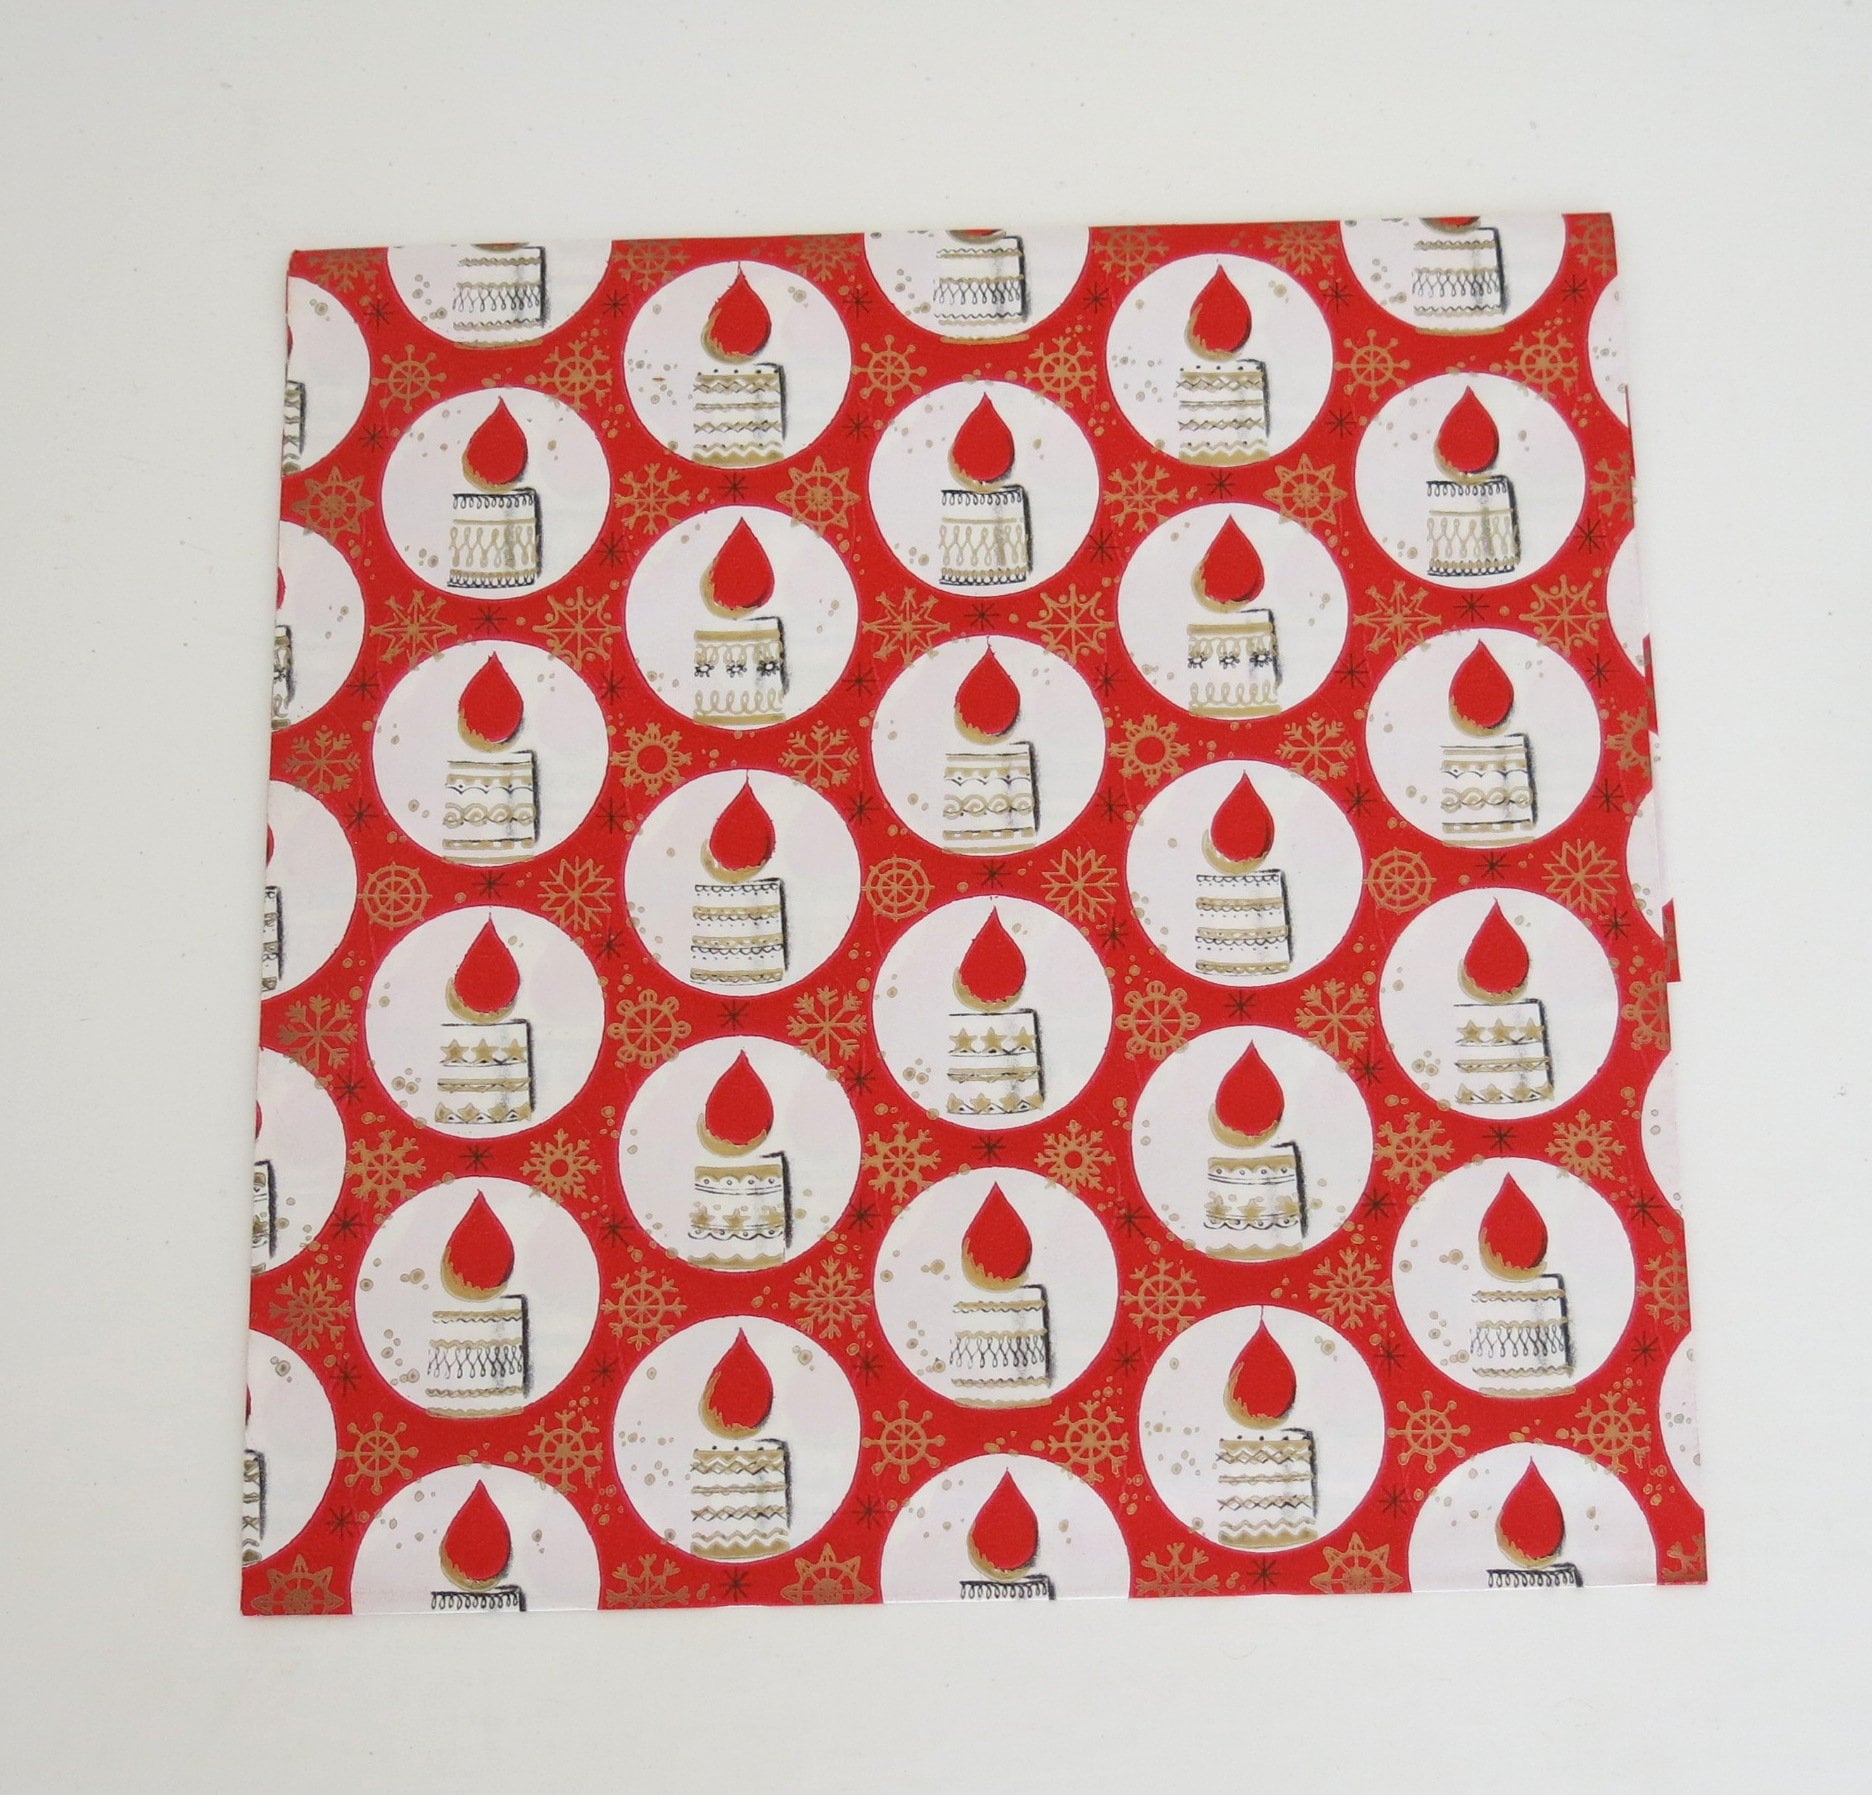 Vintage Kaycrest 1950's Wedding & Baby Wrapping Paper - Your